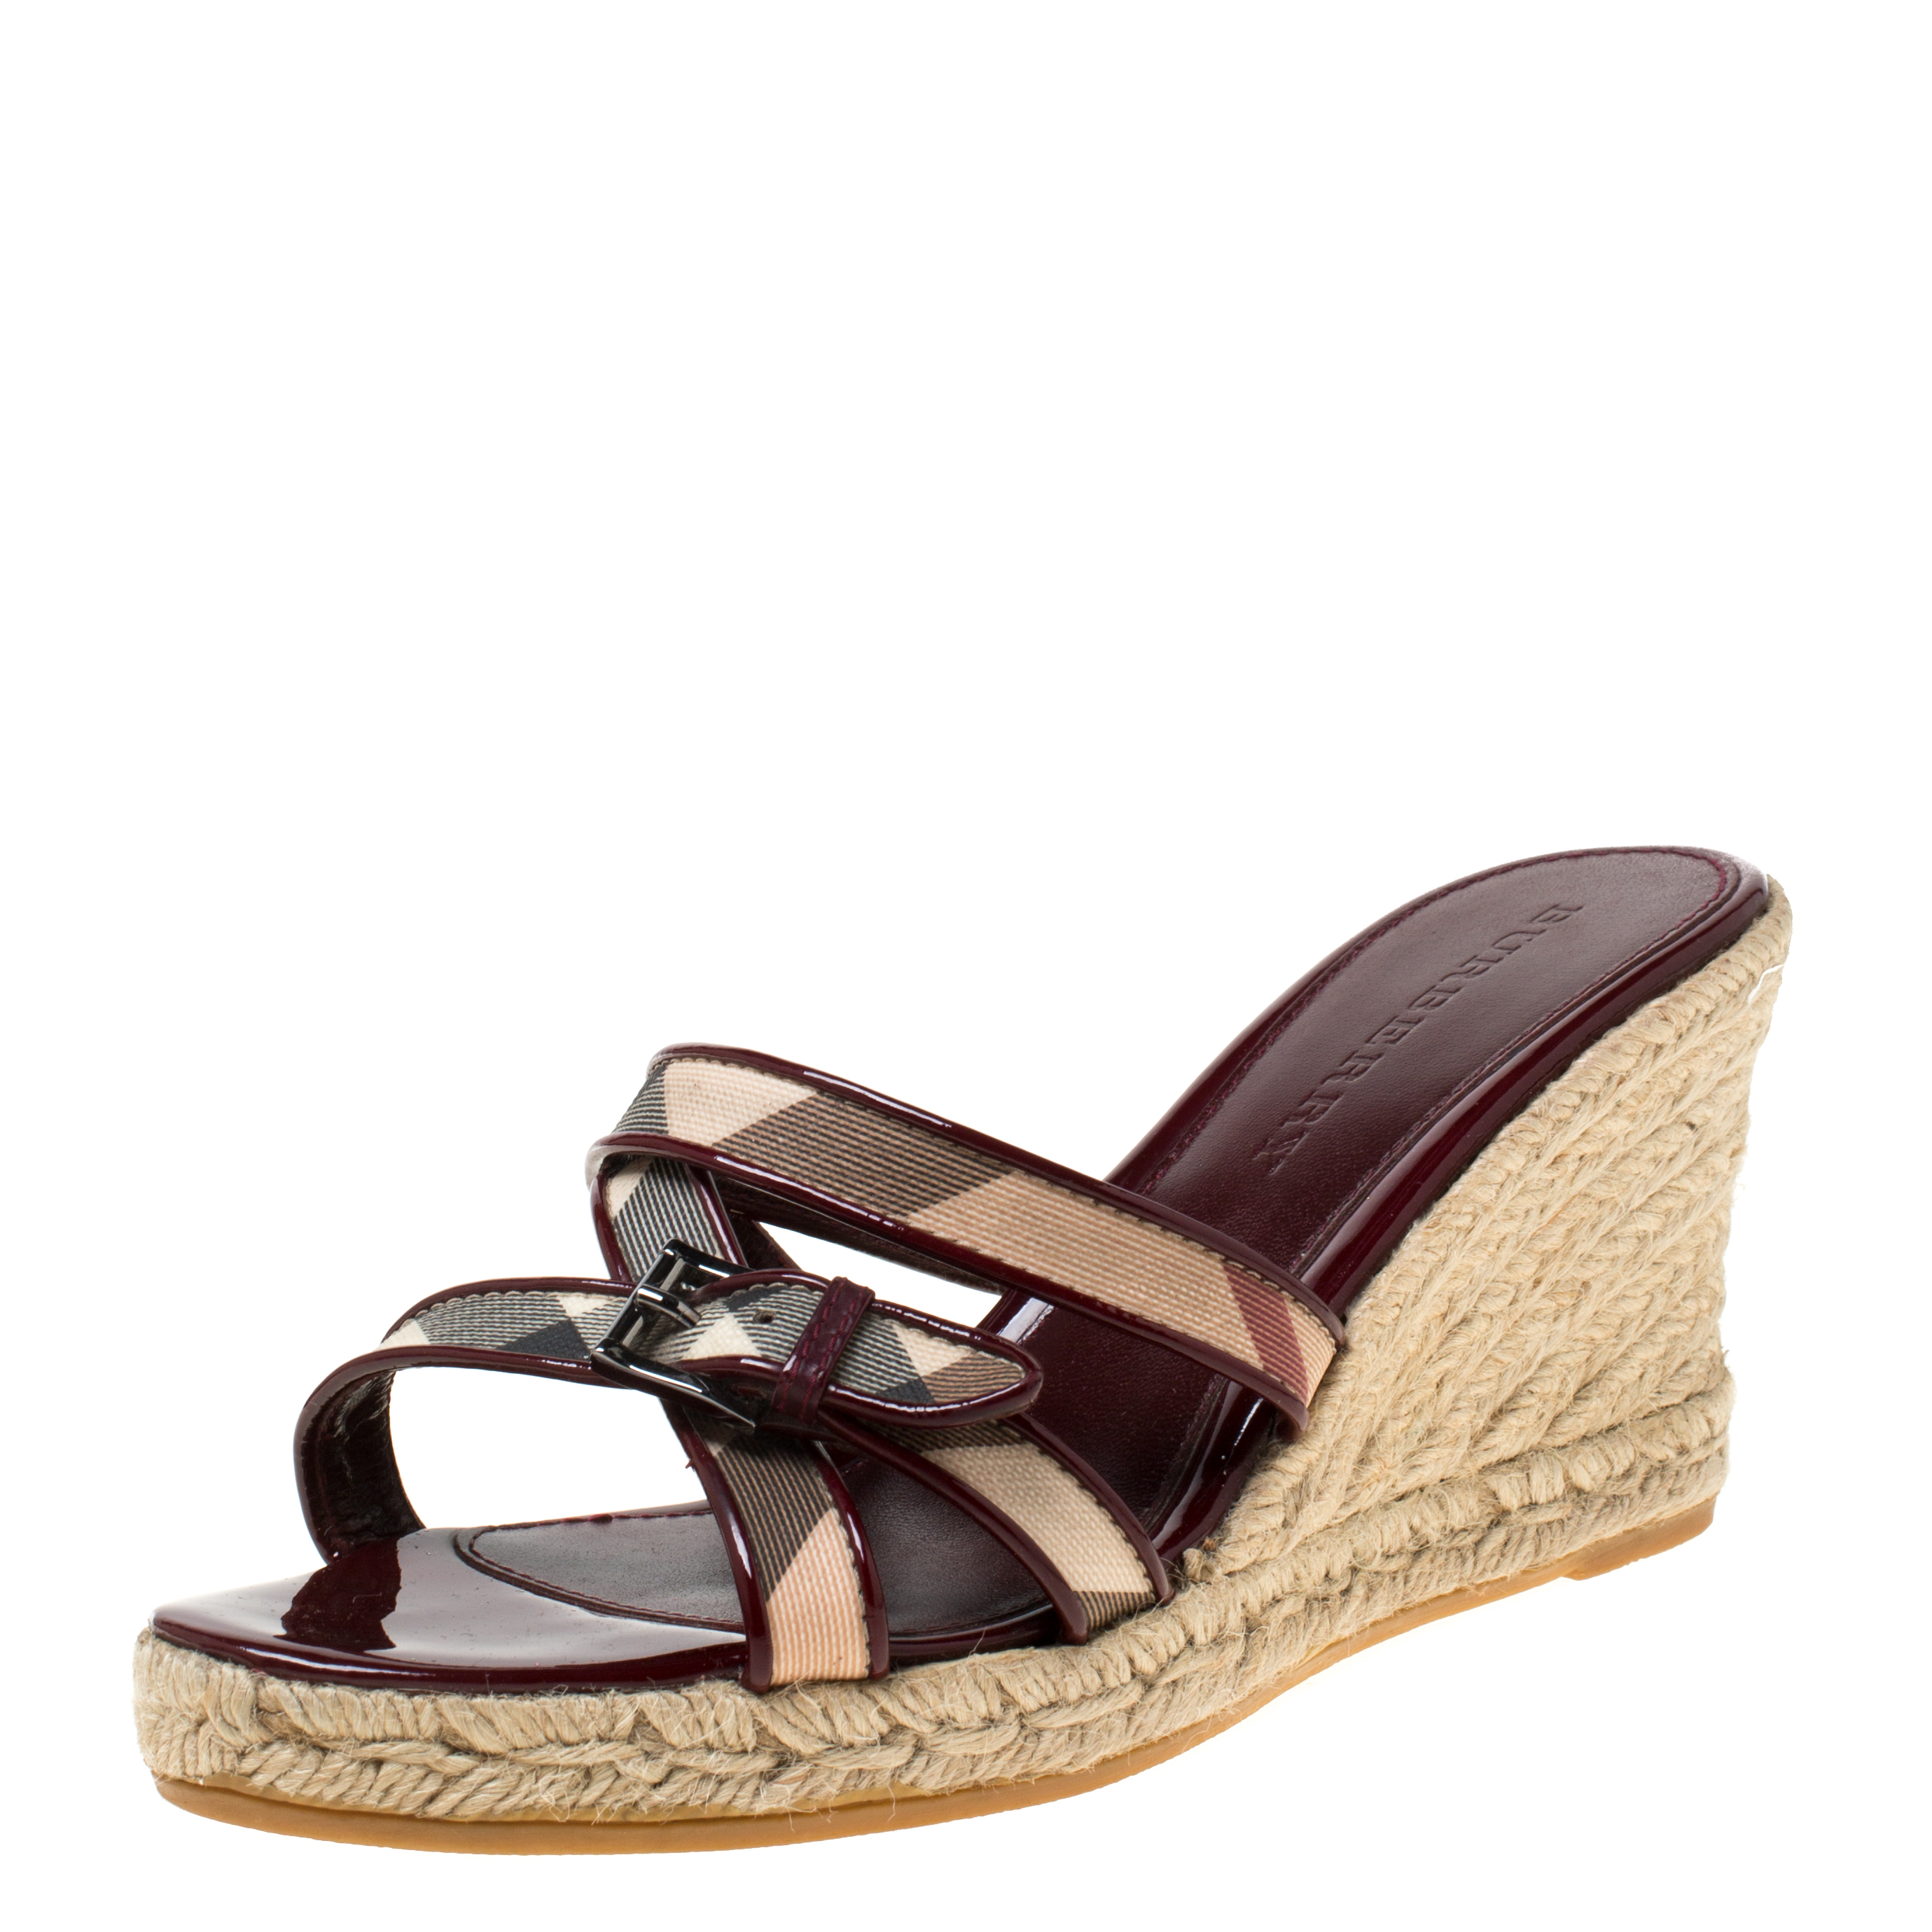 Burberry Burgundy Patent Leather And Nova Check Canvas Espadrille Wedge Sandals Size 40